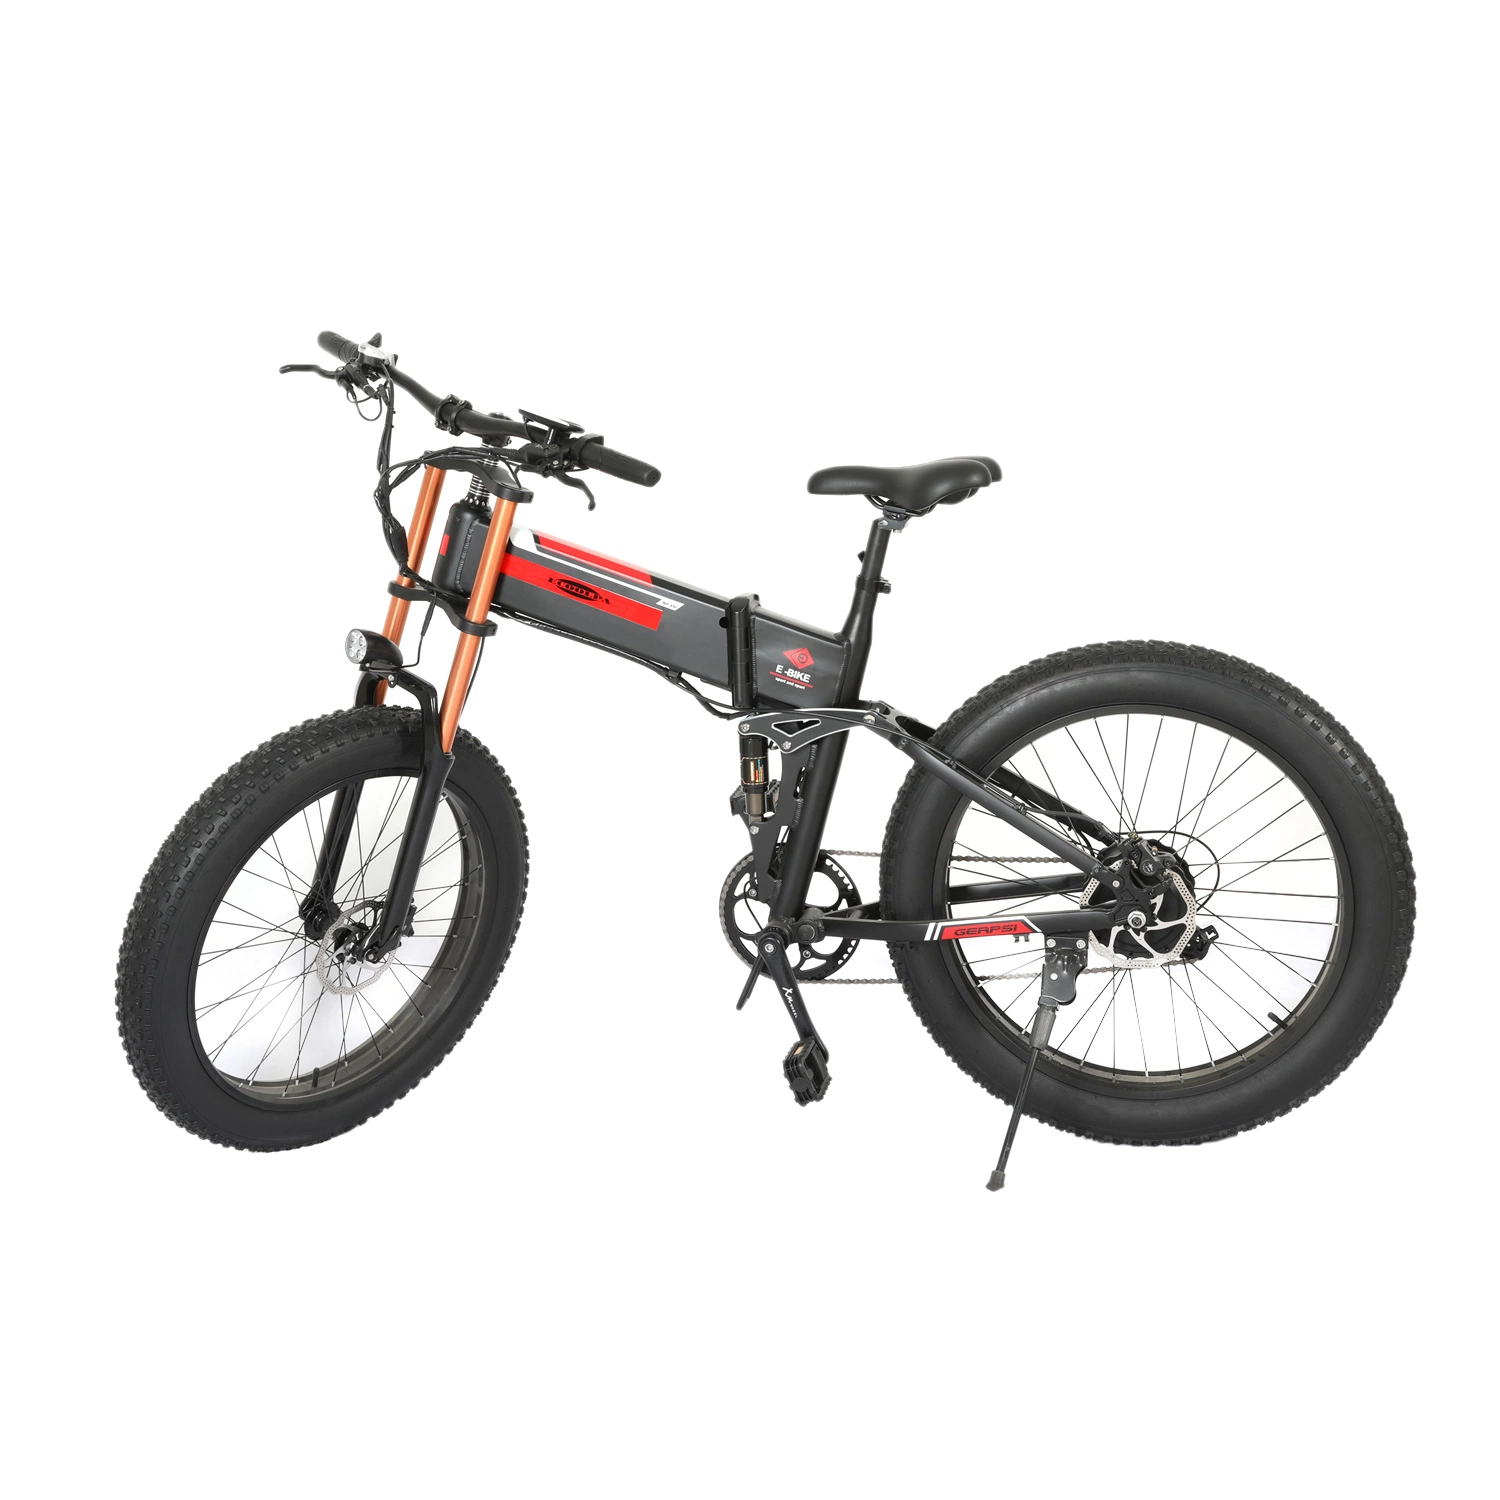 26inch Light Folding Bike Electric City Bicycle Electric Mountain Bike Vehicle Bicycle with 500W Brushless Motor 36V 7.8ah Battery LCD Displayer Dirt Bike